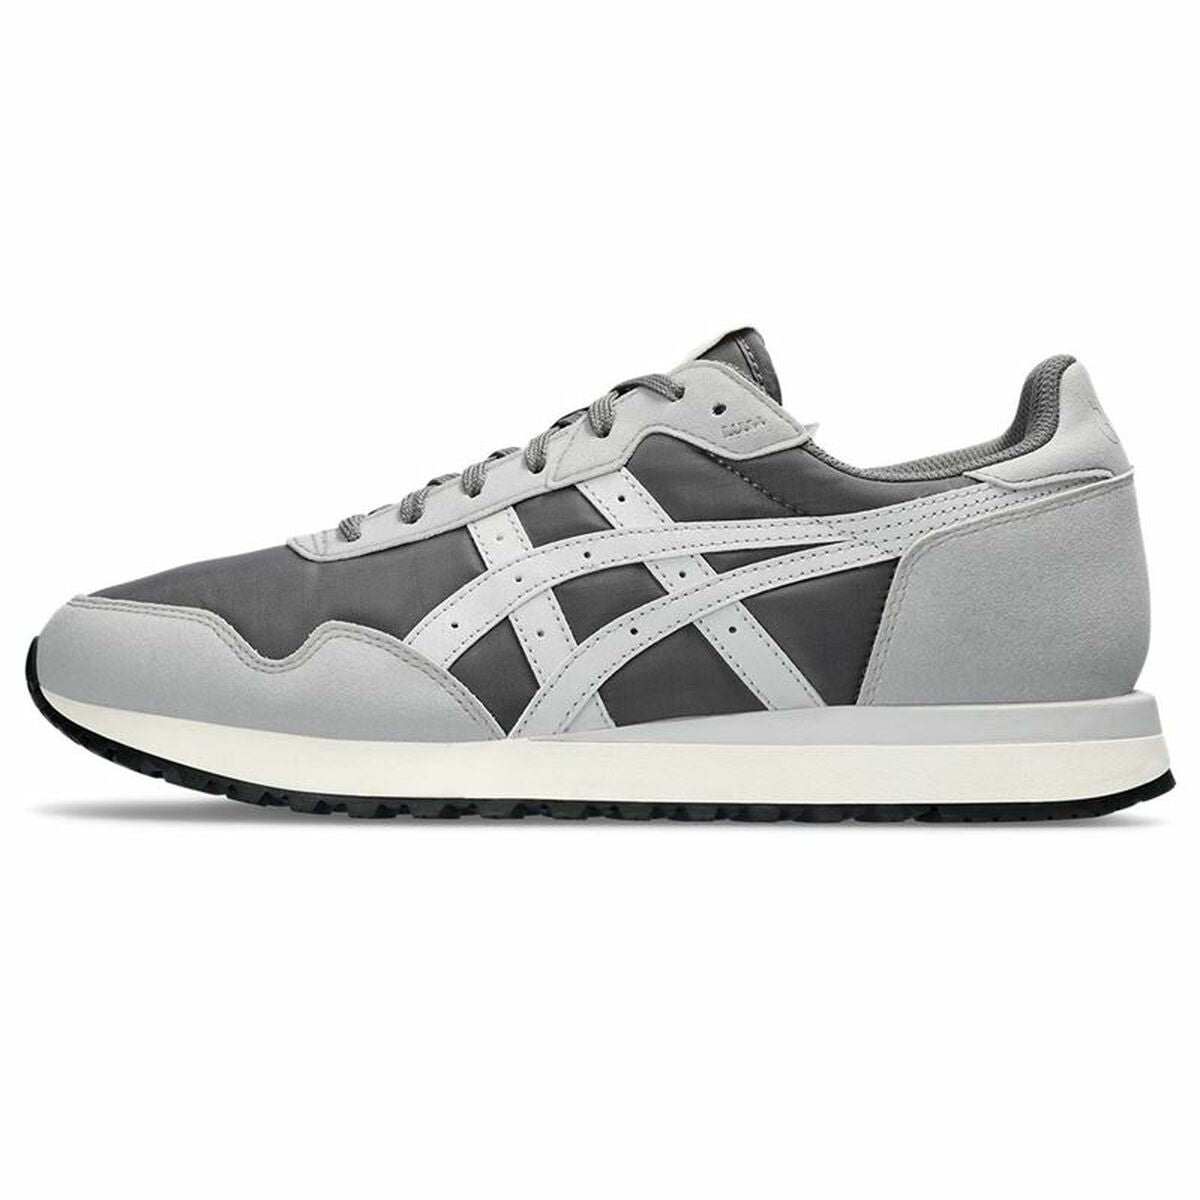 Chaussures casual homme Asics Tiger Runner II Gris